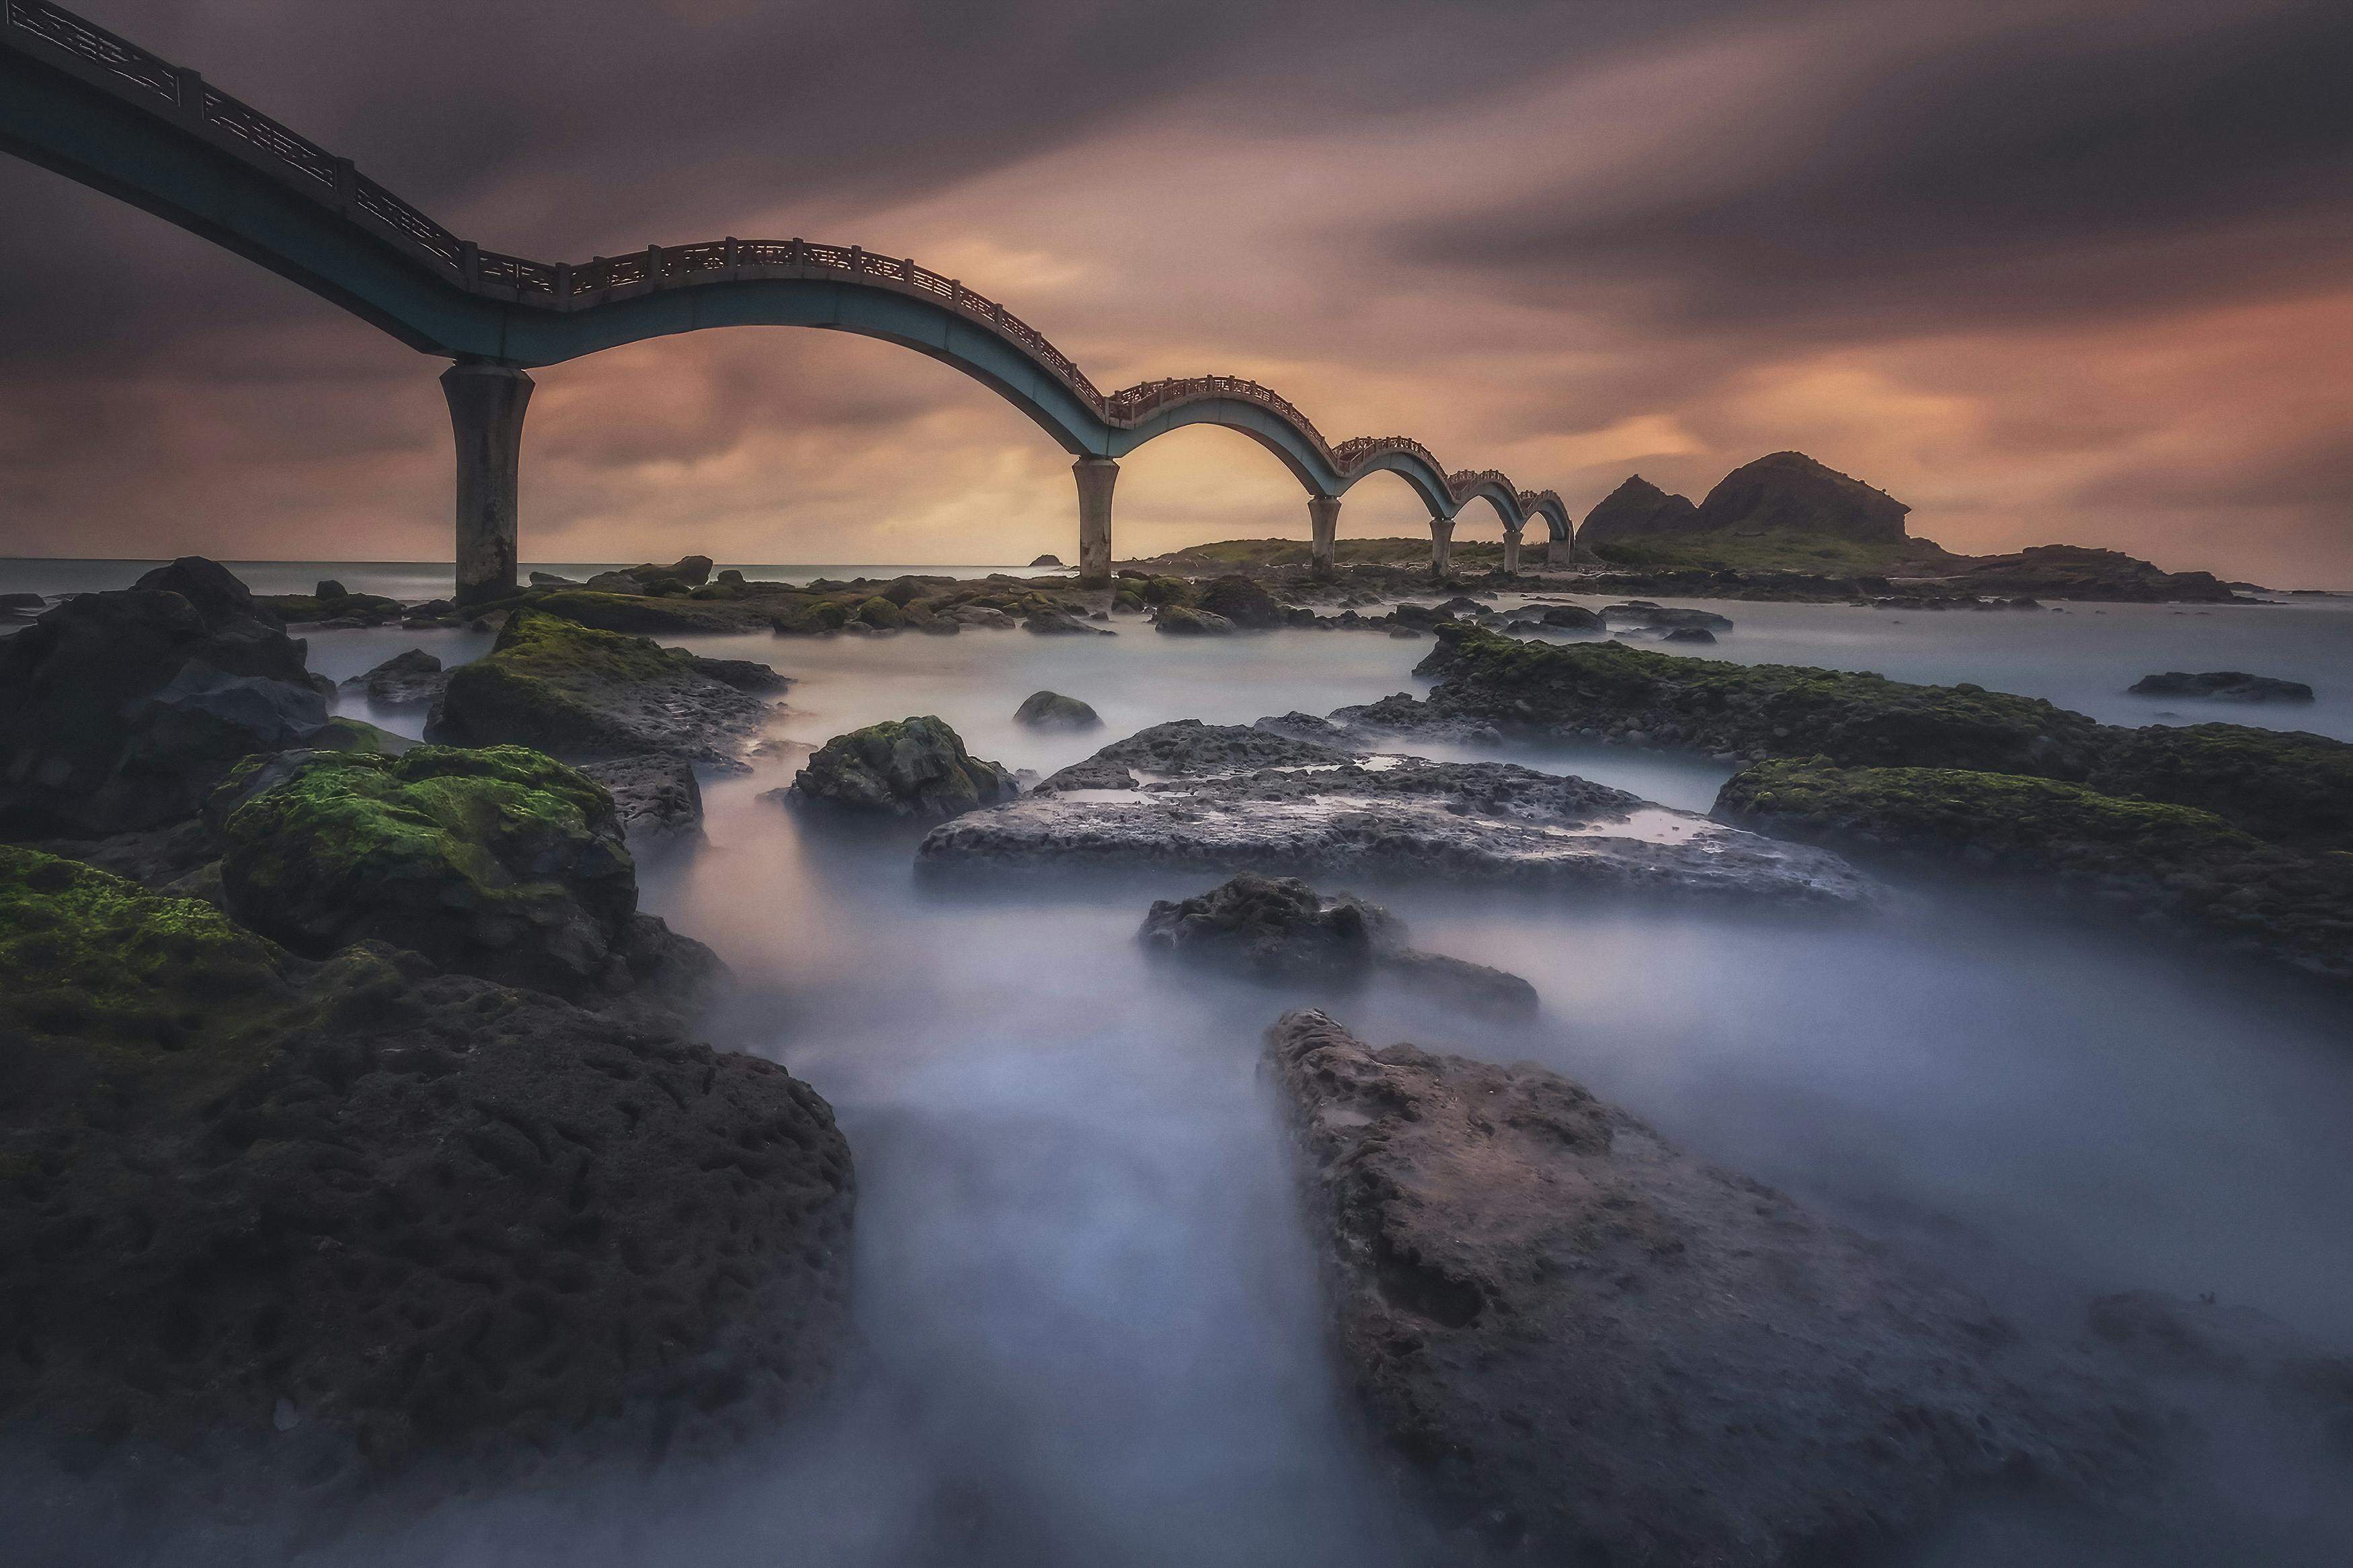 "The Bridge of the Immortals, this is the local english translation name of this bridge. An eight leap bridge connecting the mainland to a sacred island in Taiwan."